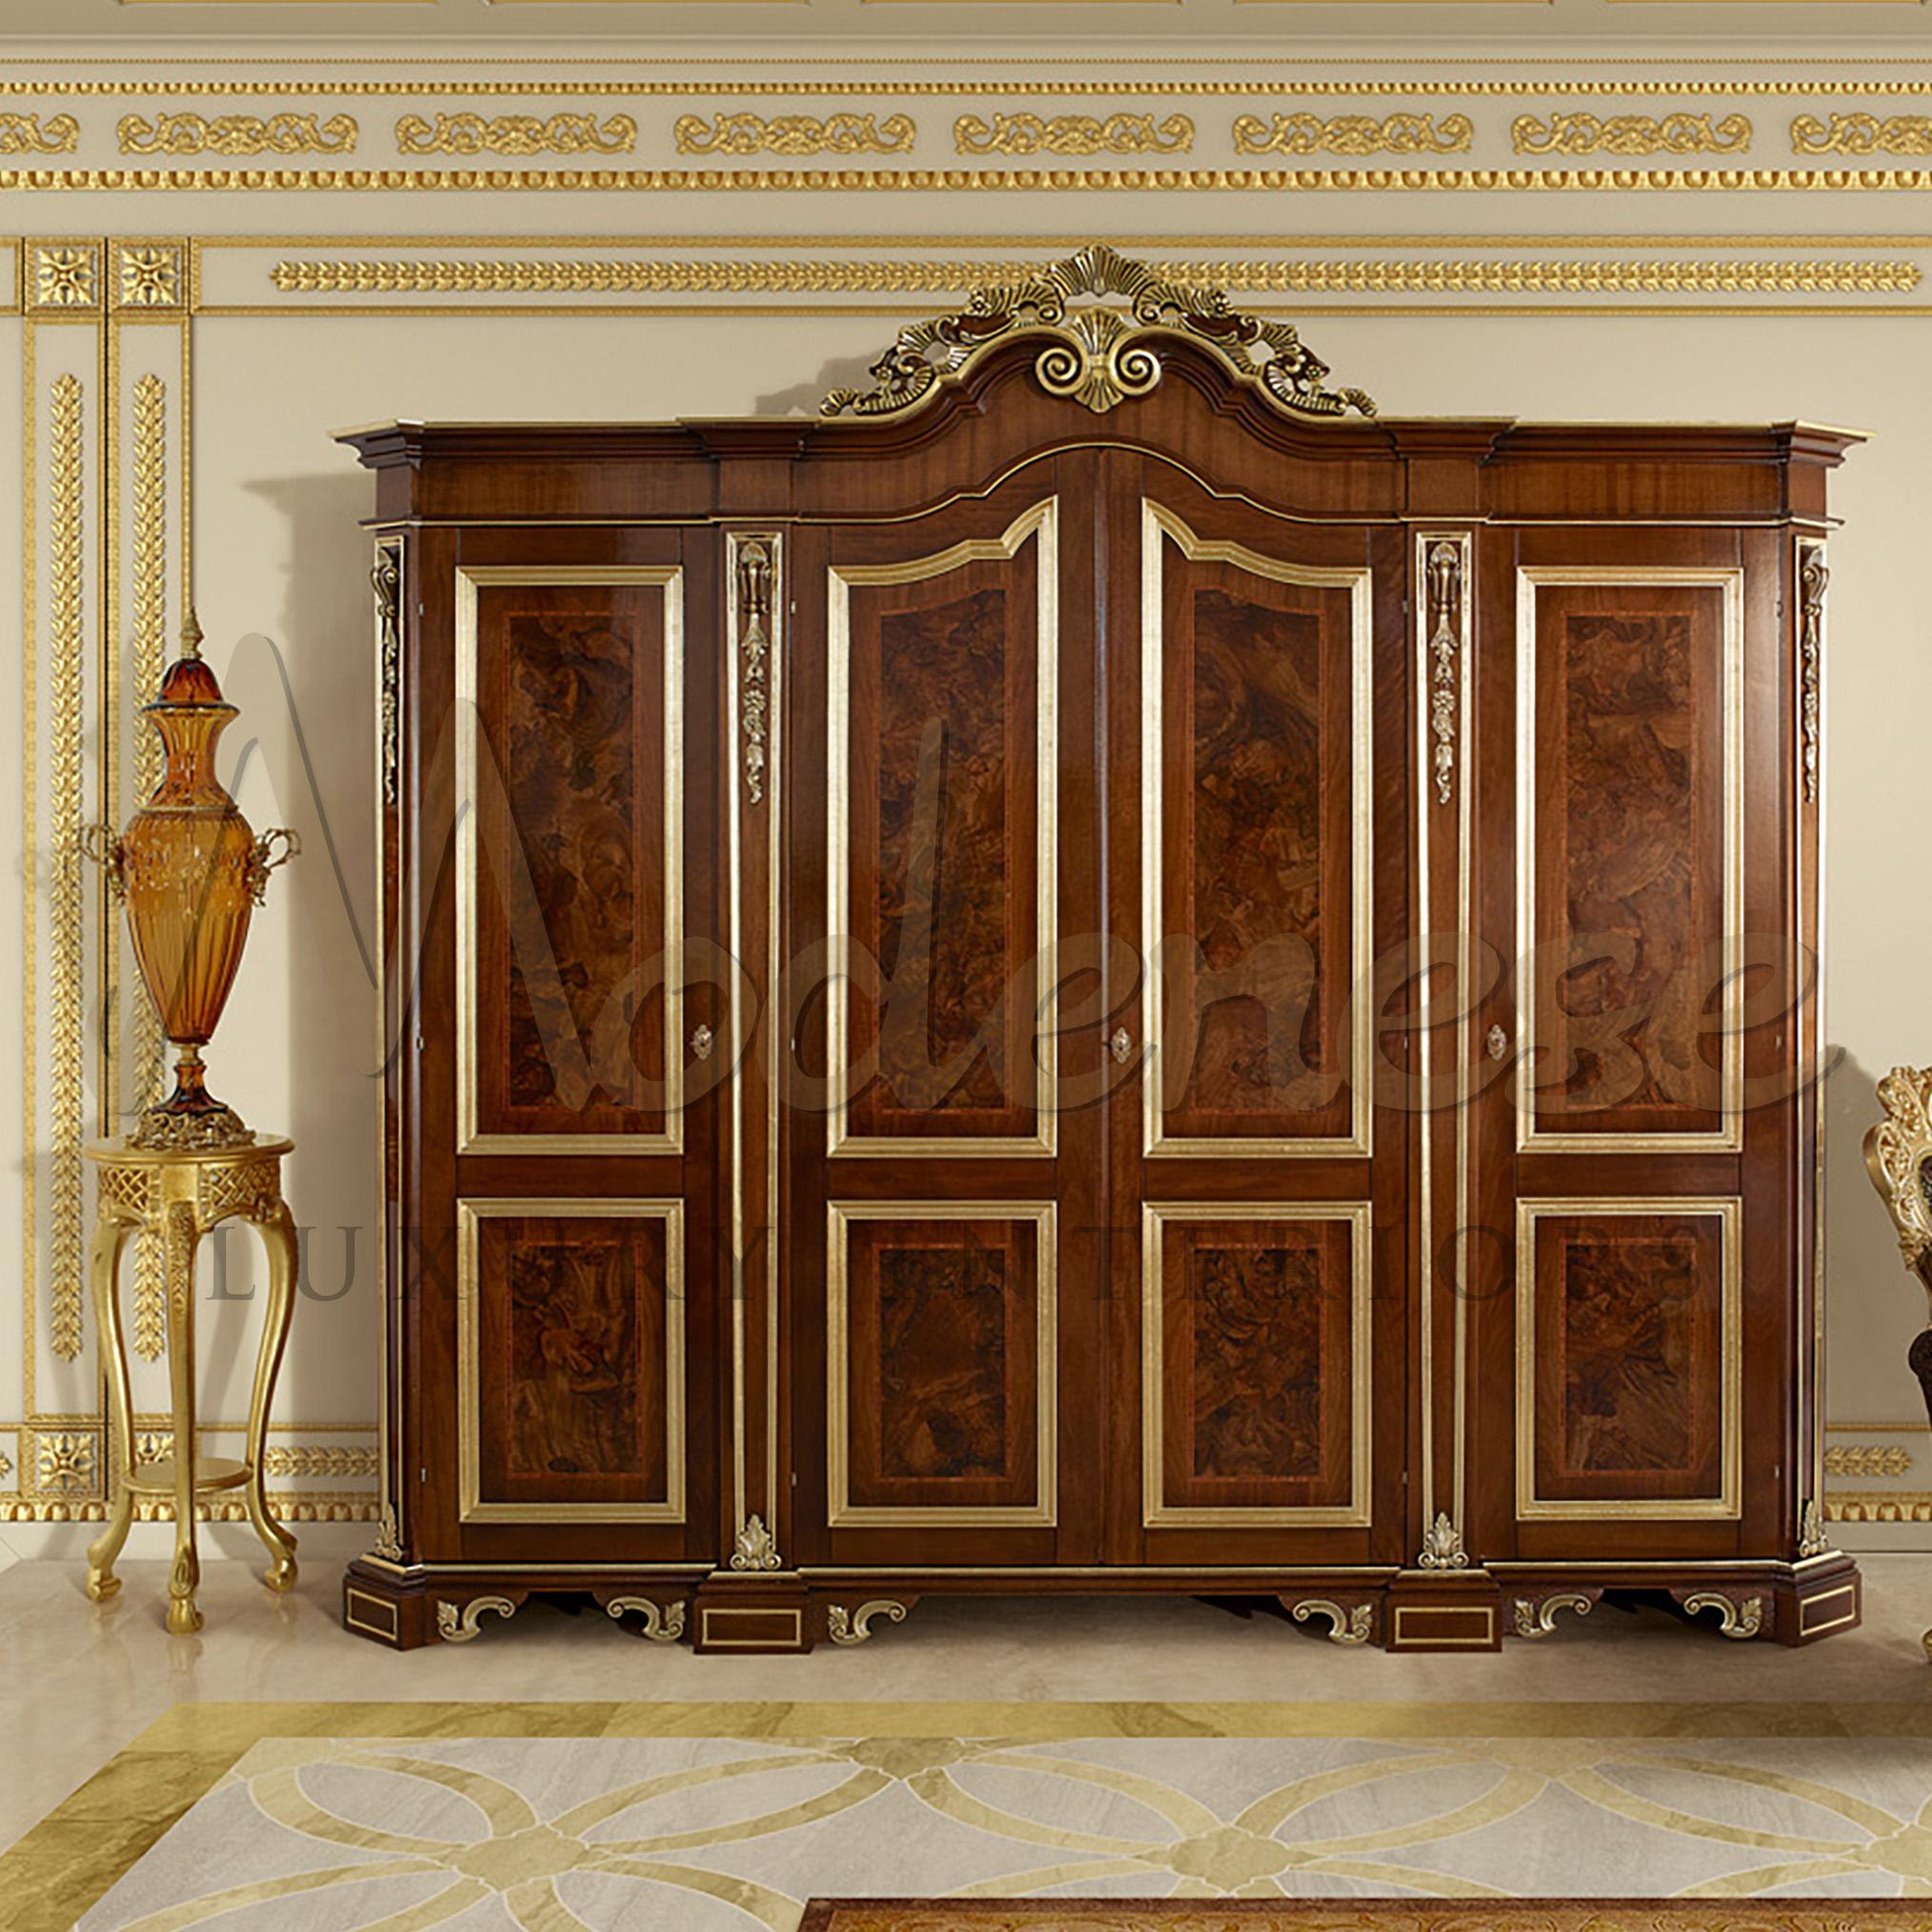 Wide and imposing wardrobe in walnut finish by the Italian producer Modenese Gastone Interiors. Its bold solid wood structure is steady and trustful while its internal three-areas disposition is carefully designed in order to maximize the available